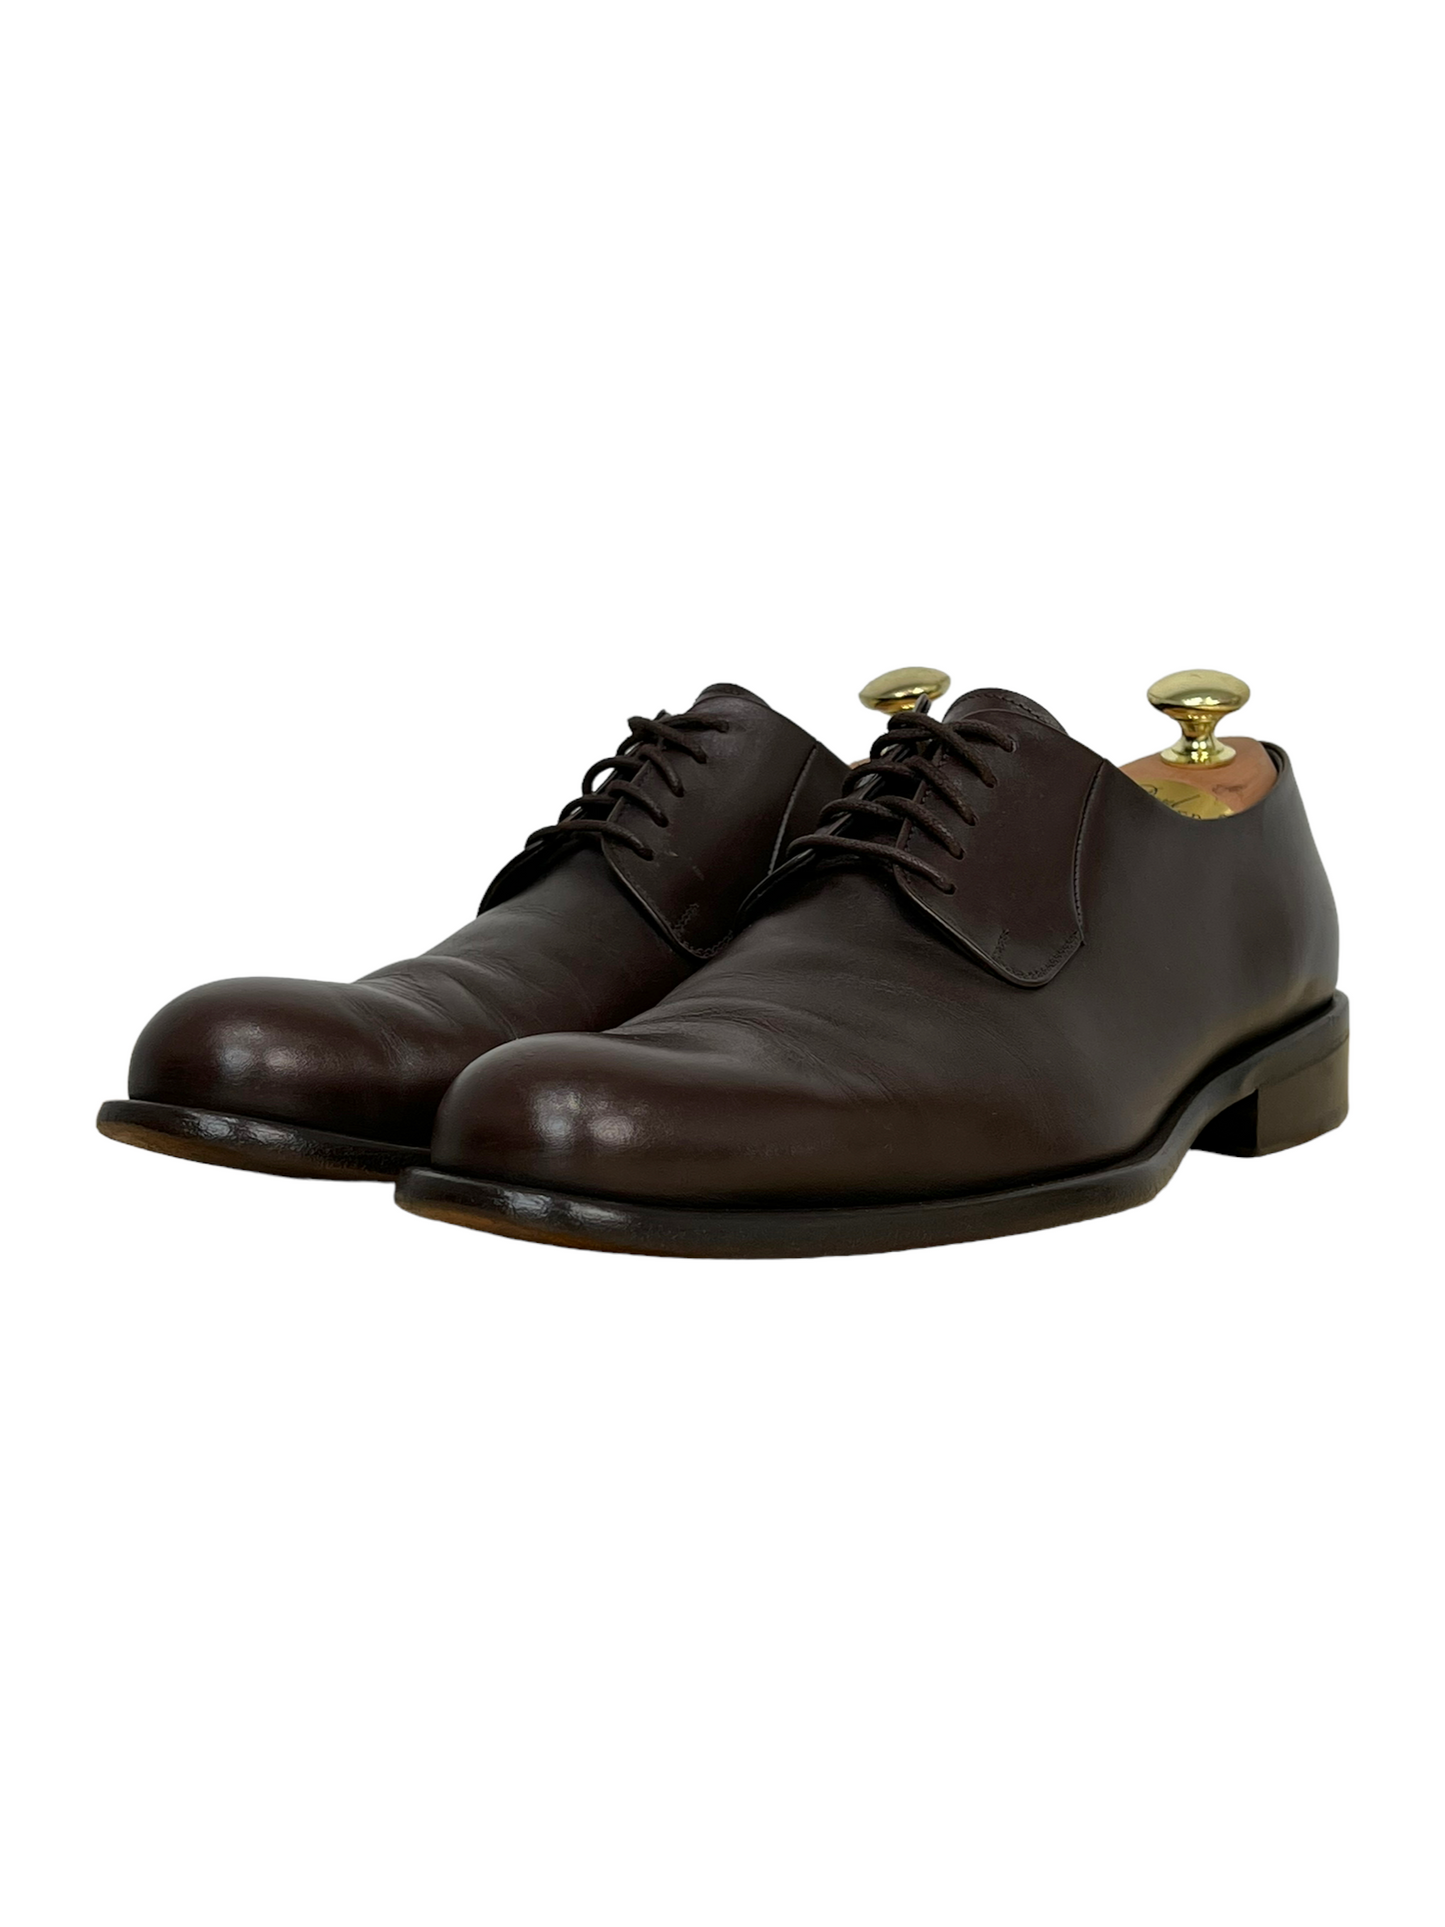 Giorgio Armani Brown Oxford Dress Shoes - Genuine Design Luxury Consignment for Men. New & Pre-Owned Clothing, Shoes, & Accessories. Calgary, Canada